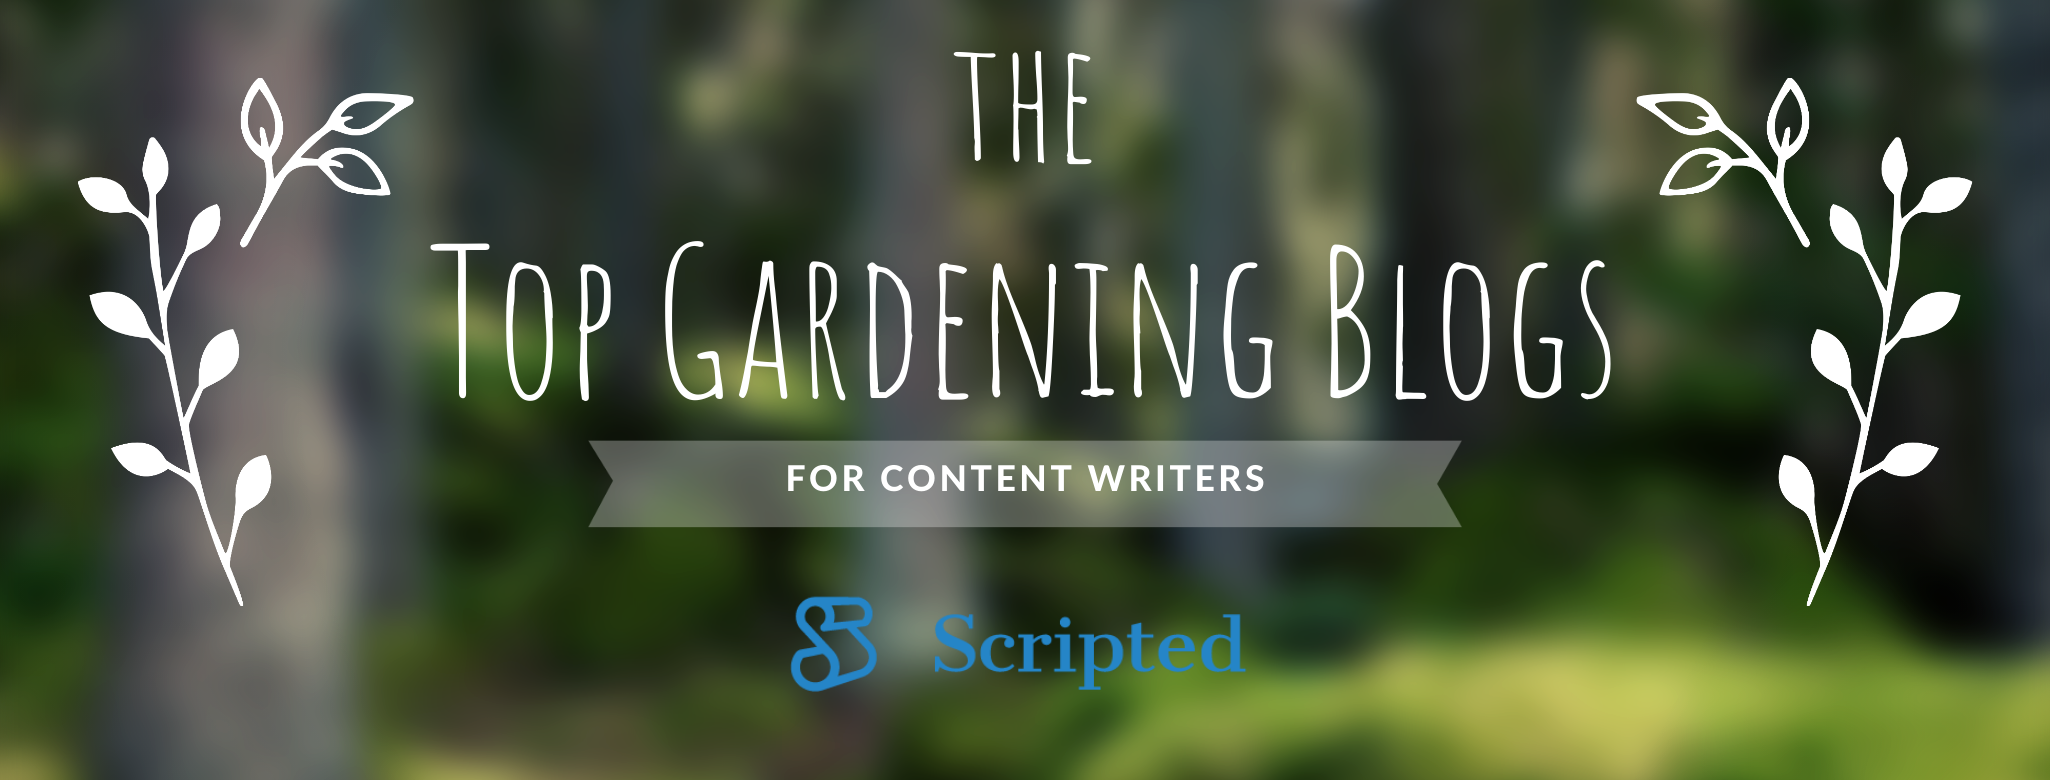 The Best Gardening Blogs For Content Writers Read